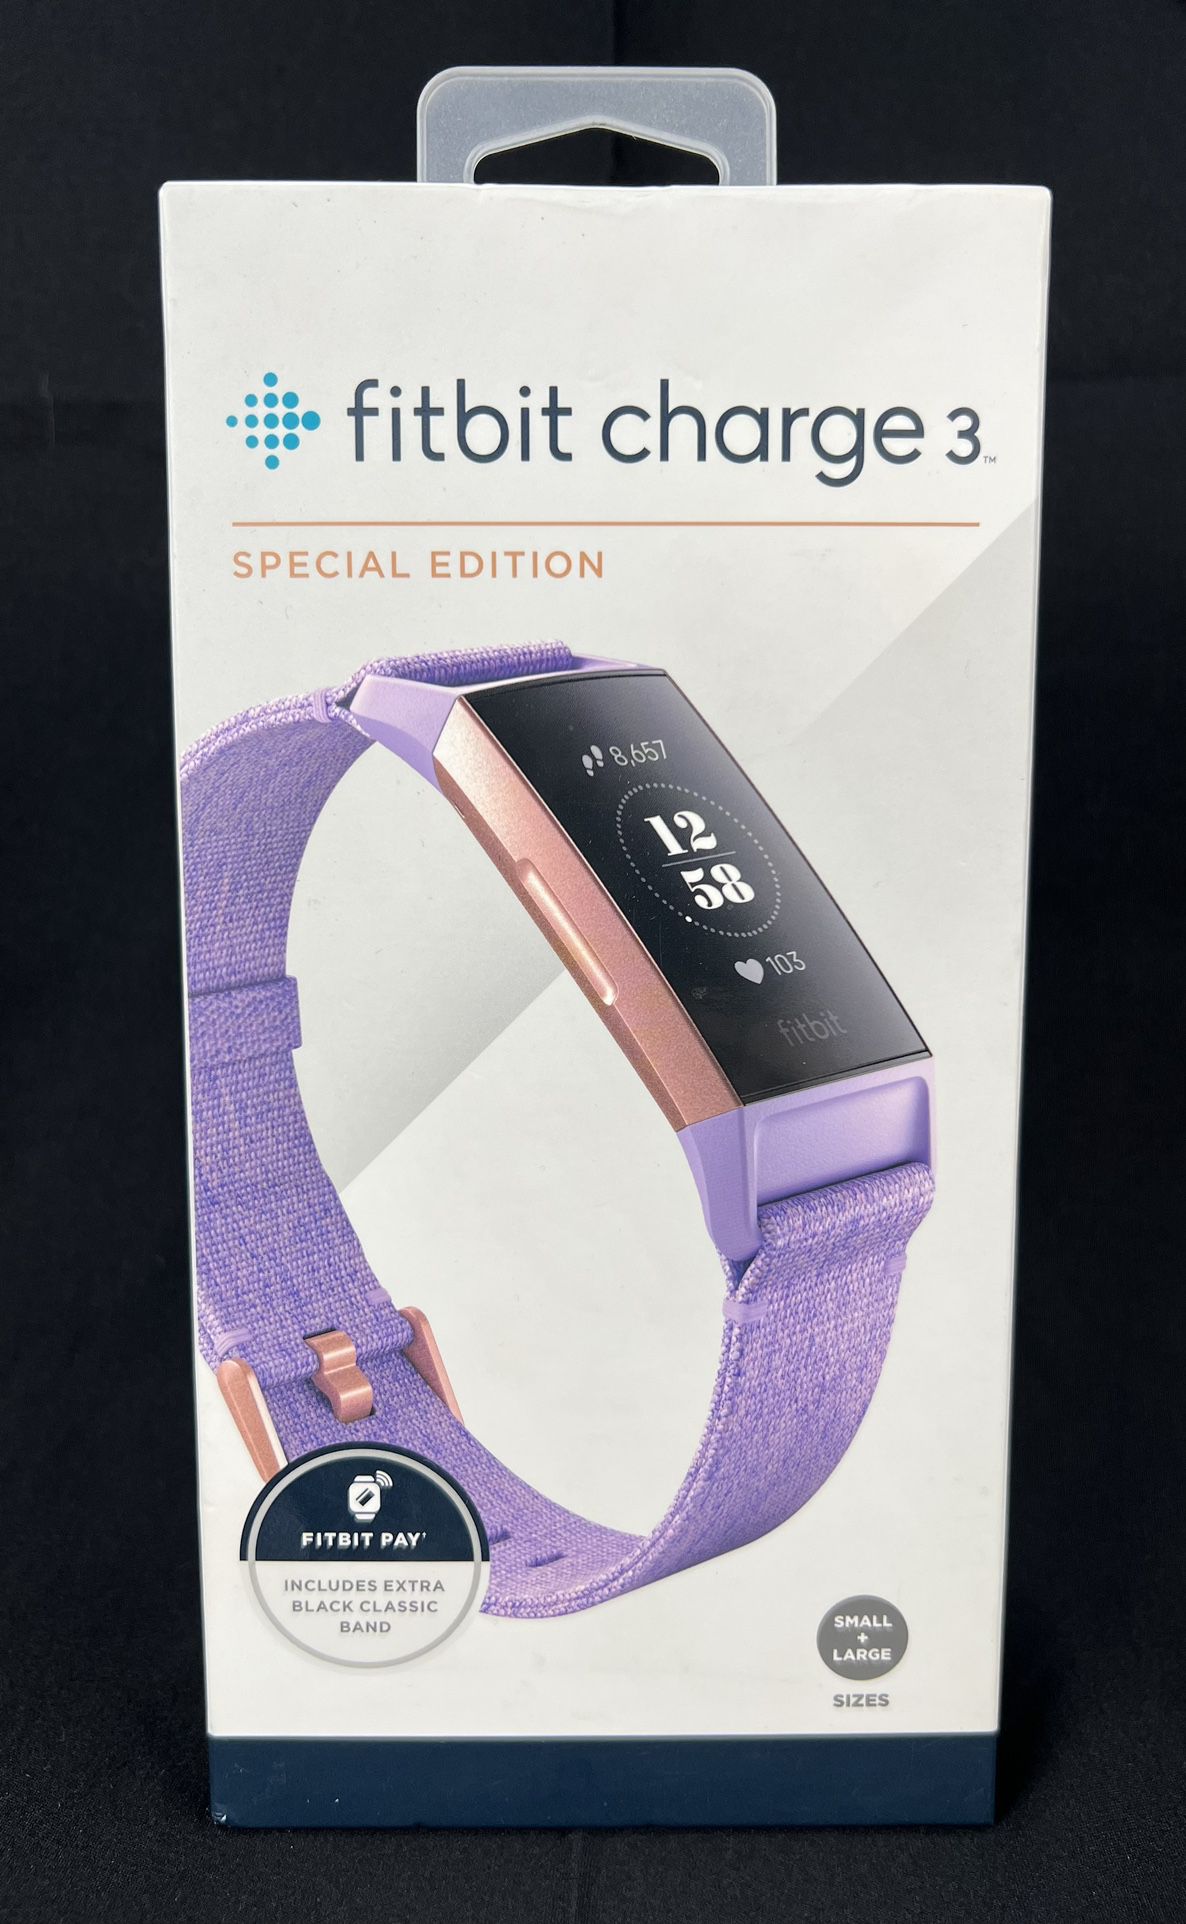 FITBIT CHARGE 3 SPECIAL EDITION (NEW & STILL IN ORIGINAL SEALED BOX)